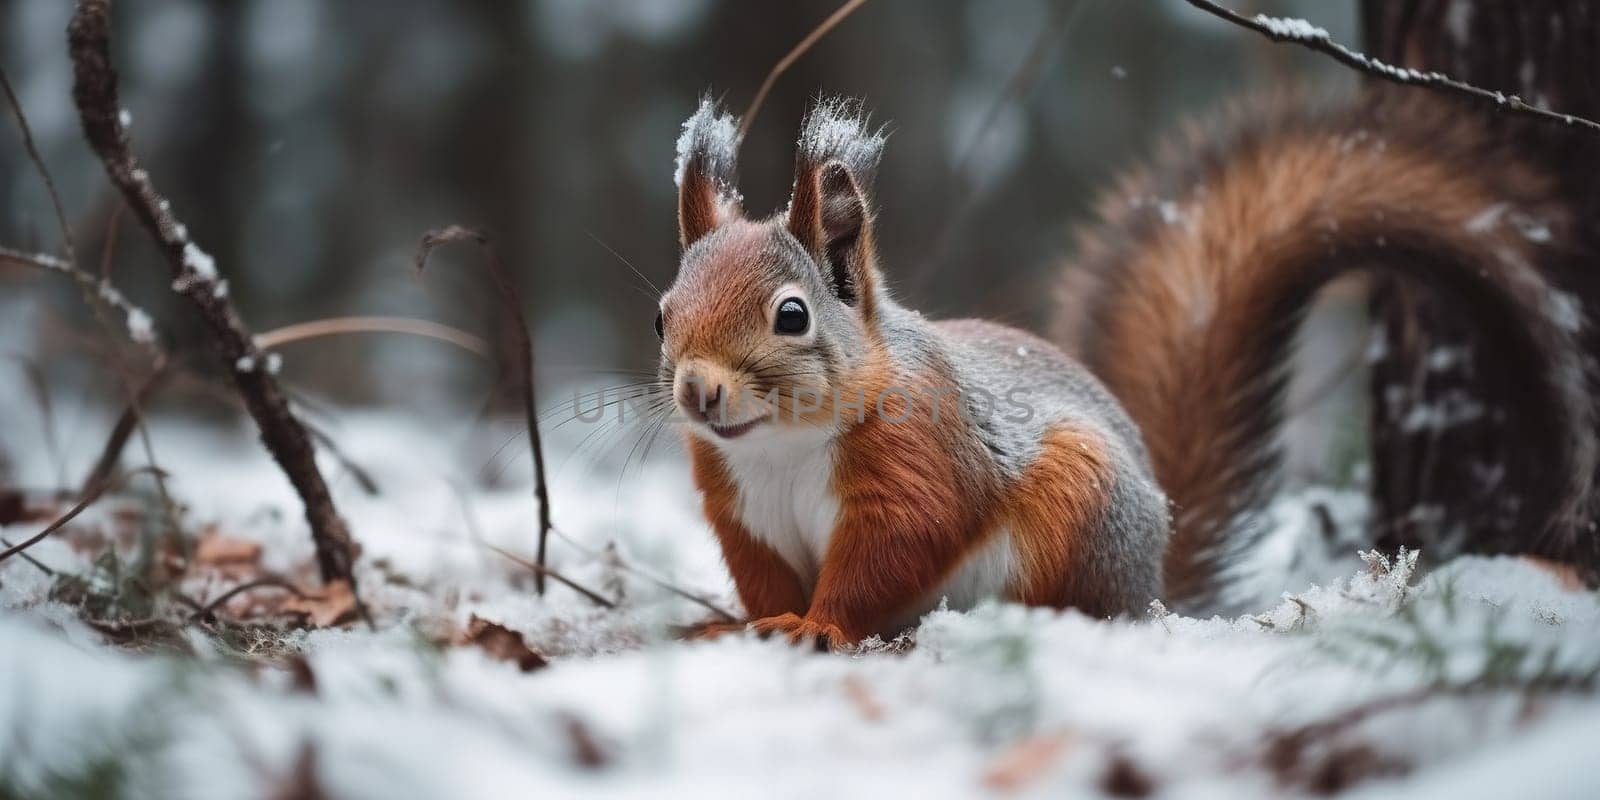 Cute Red Wild Squirrel In Winter In The Forest by tan4ikk1